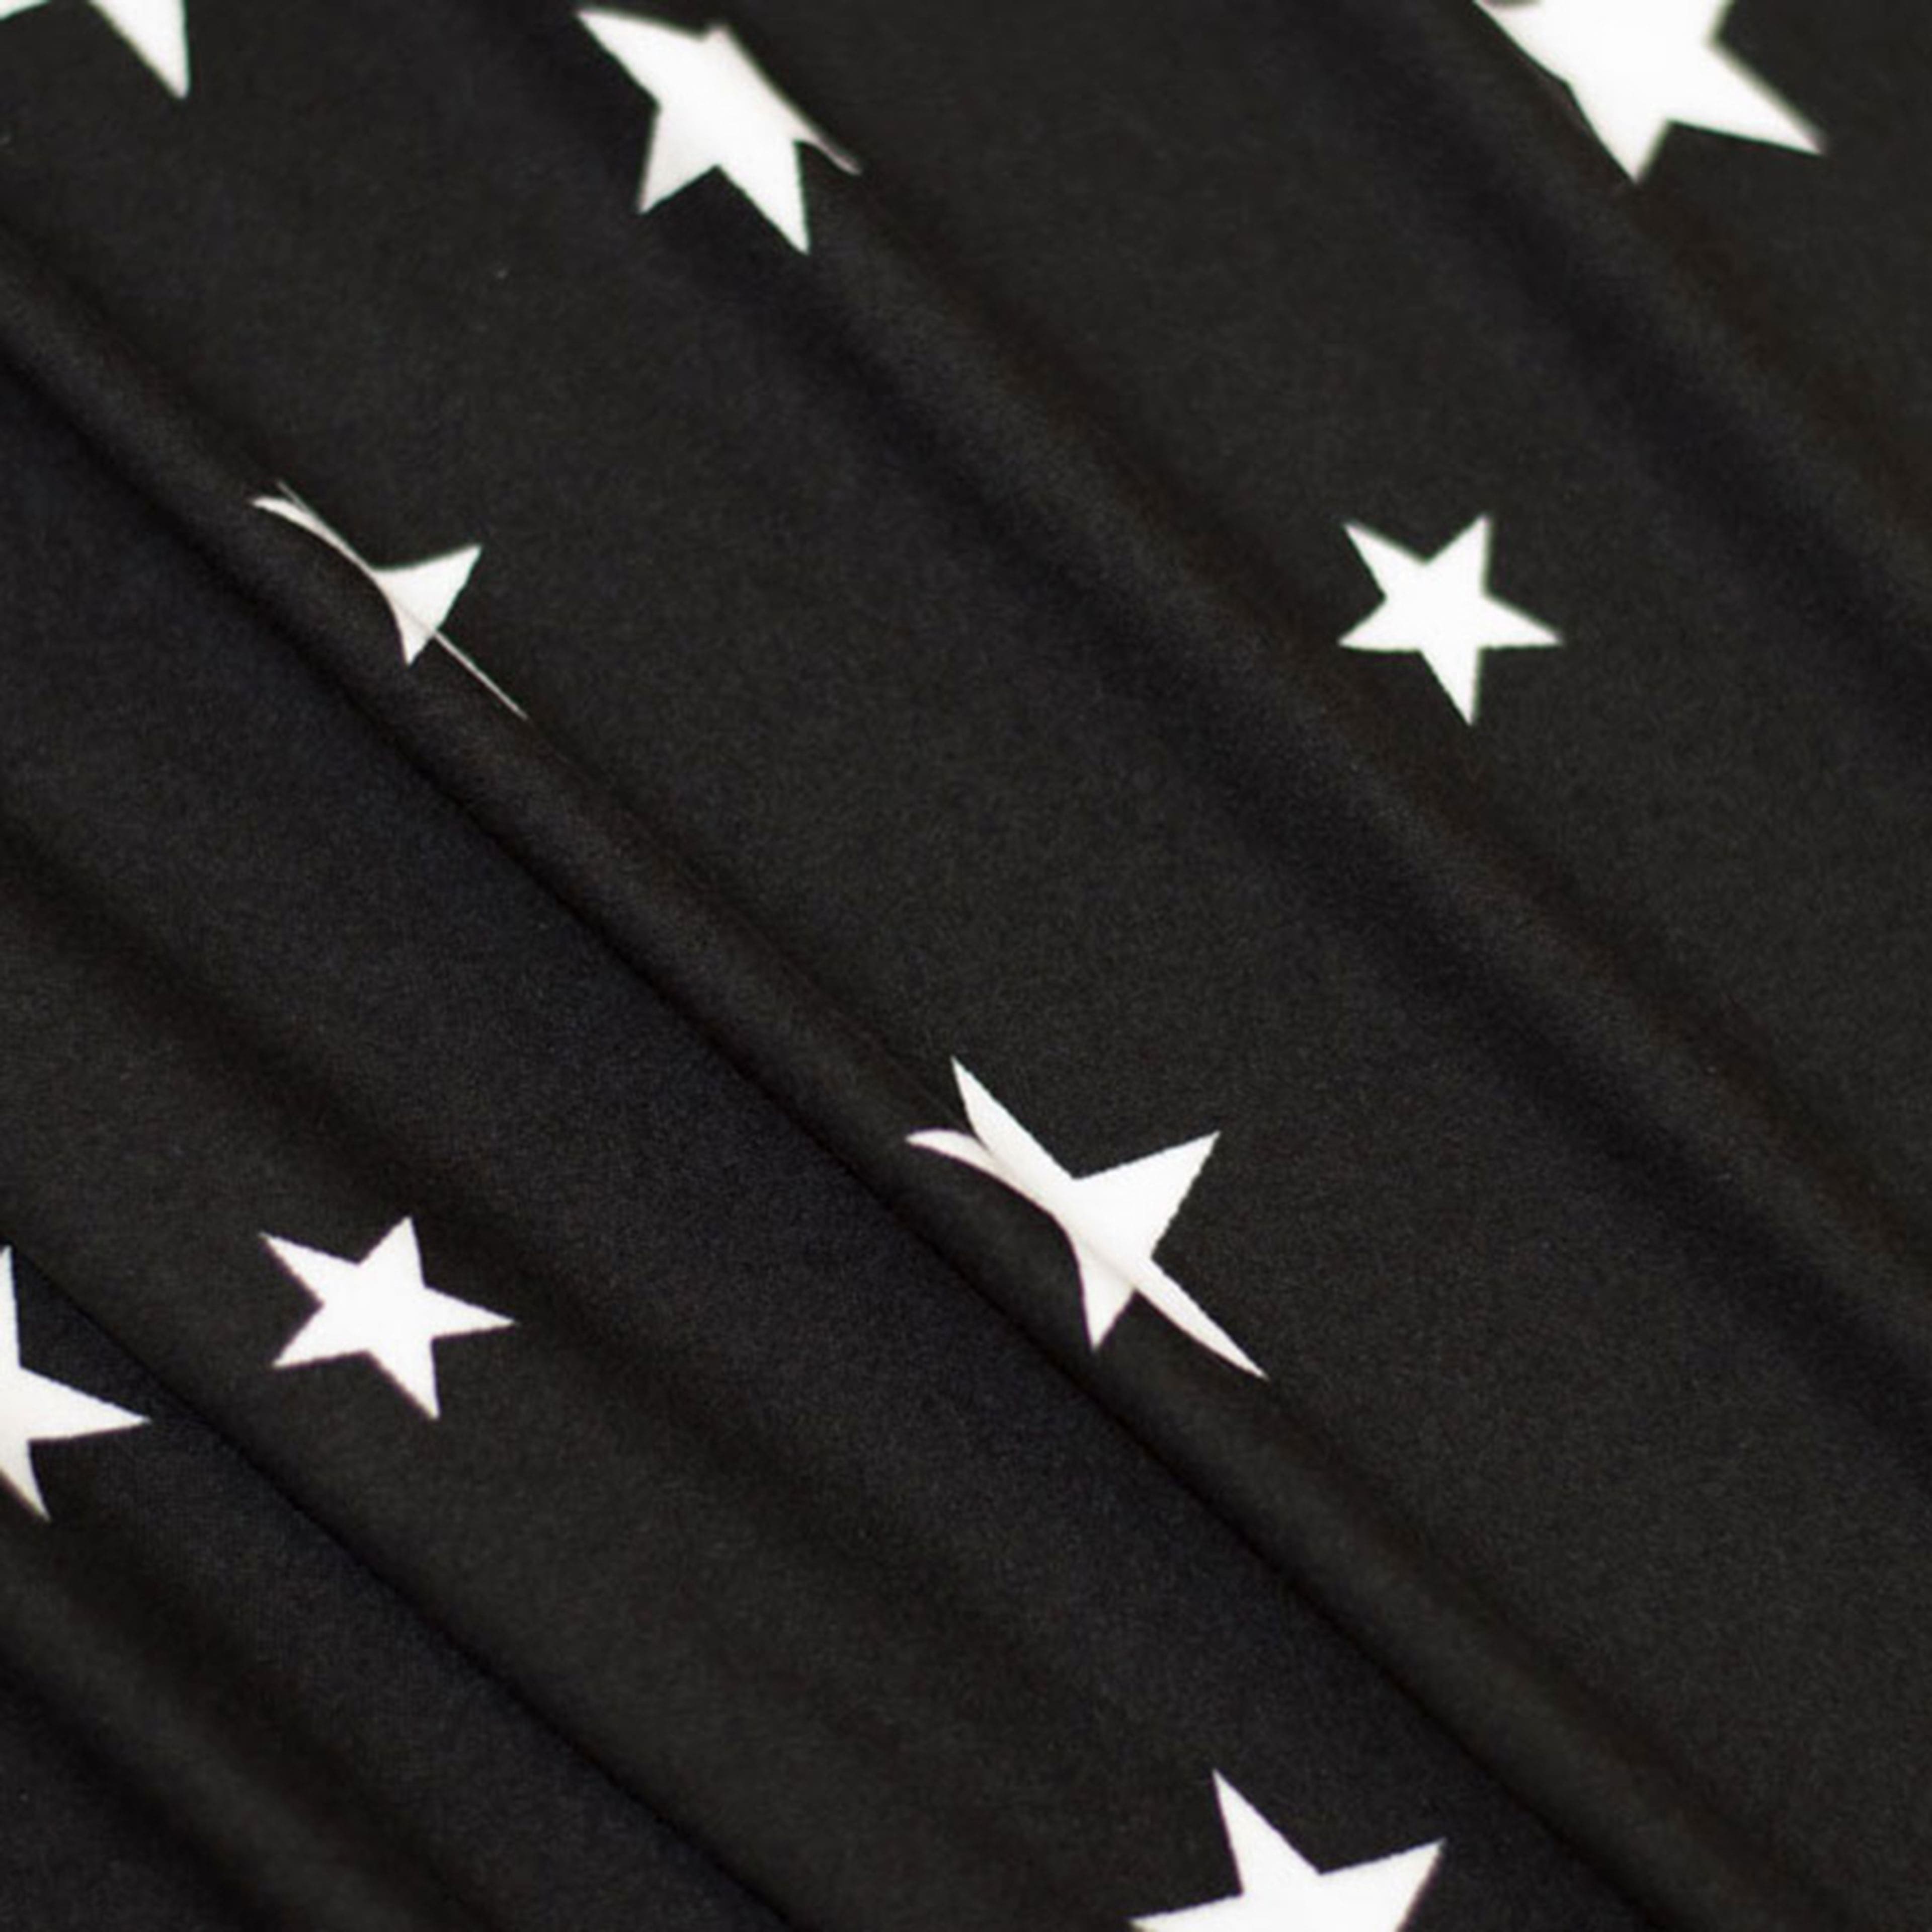 Fabric Merchants Stars on Black Double Brushed Stretch Fabric